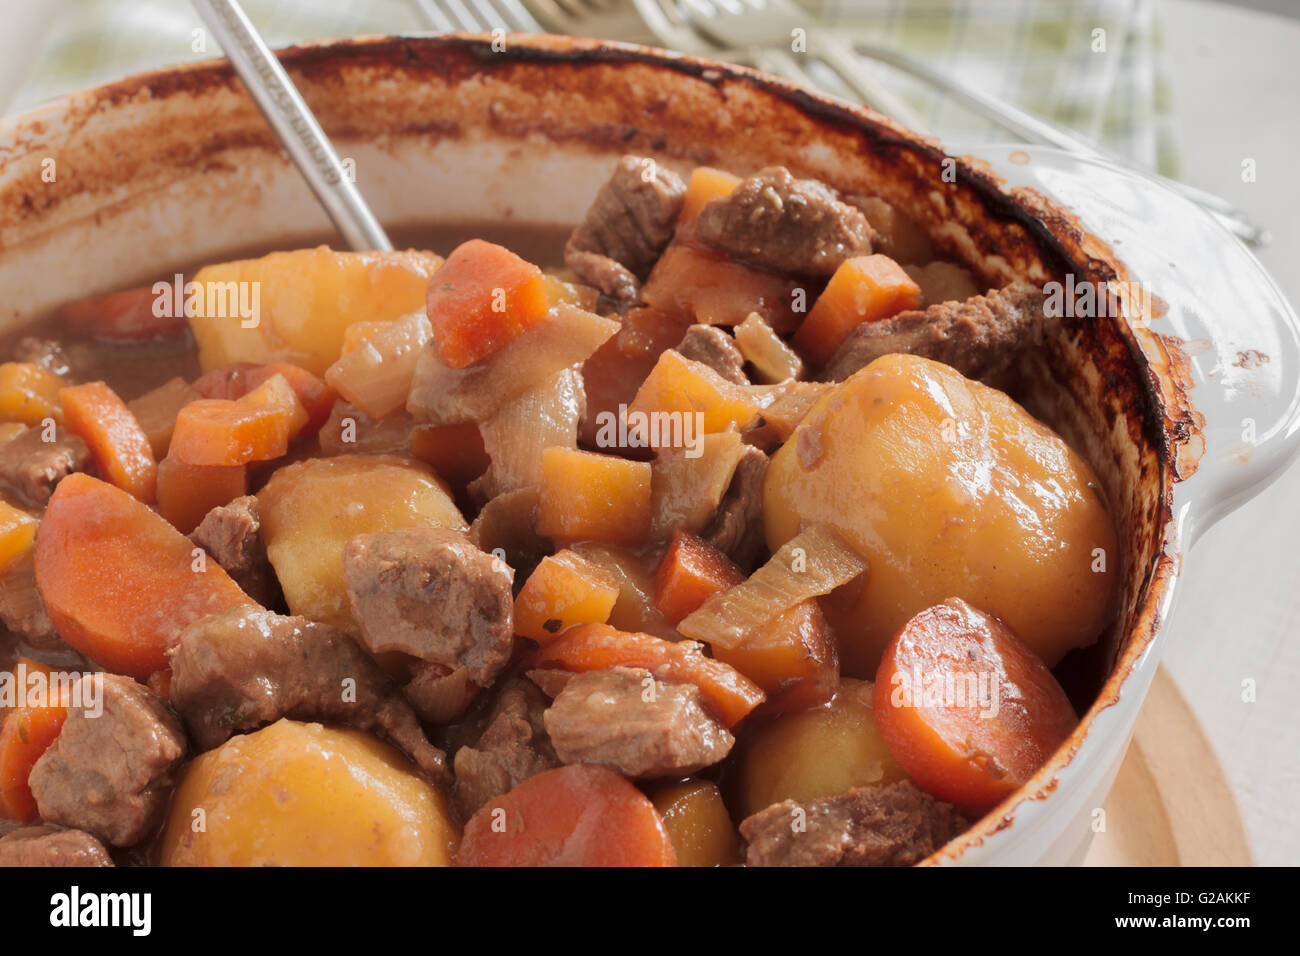 Hearty meat and vegetable stew a traditional dish containing meat gravy potatoes turnips onions and carrots Stock Photo